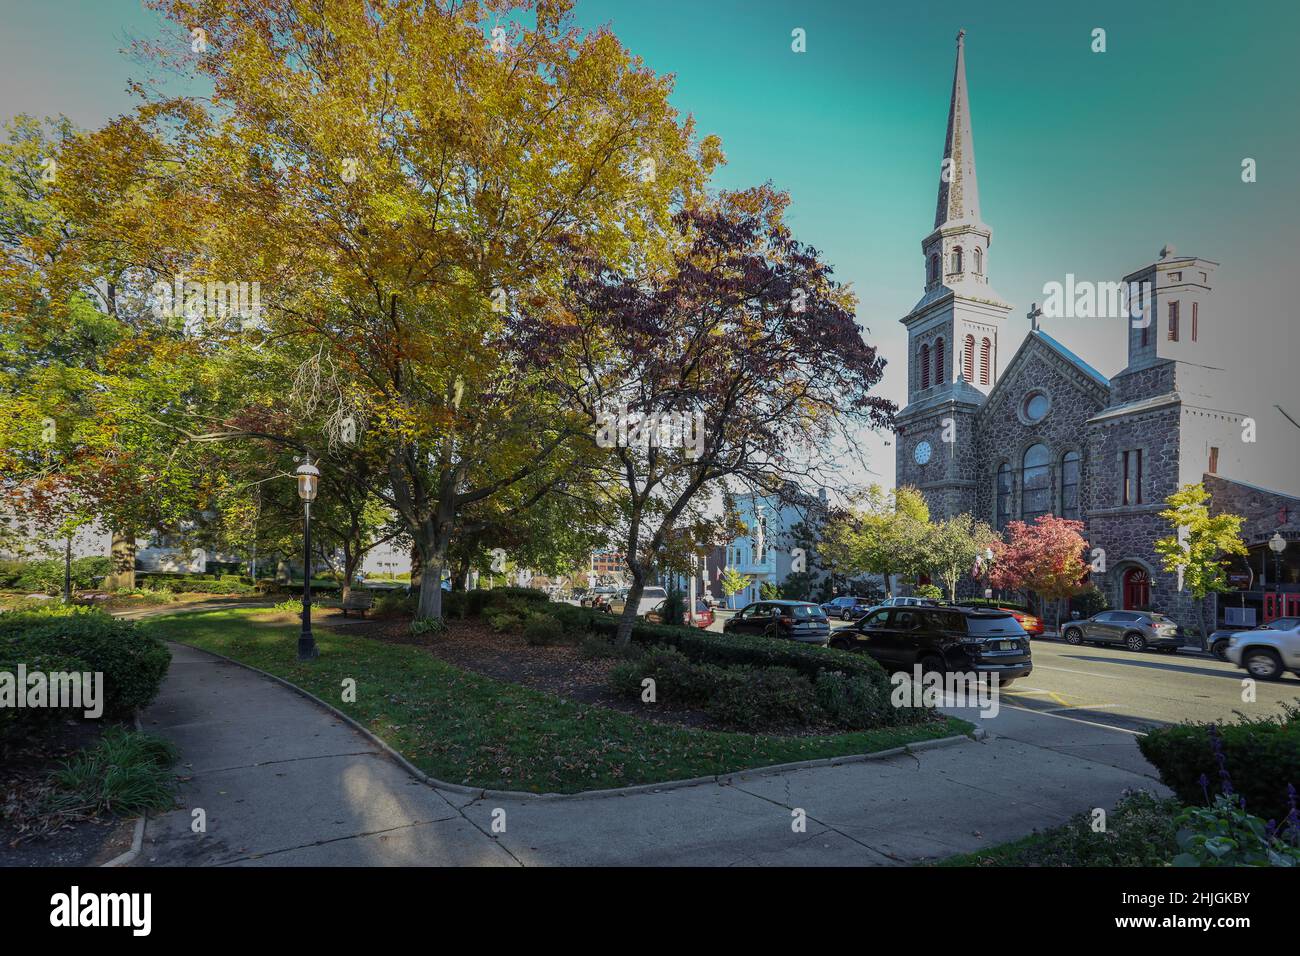 Morristown, NJ USA - November 6, 2021: Morristown Green on a late fall afternoon Stock Photo